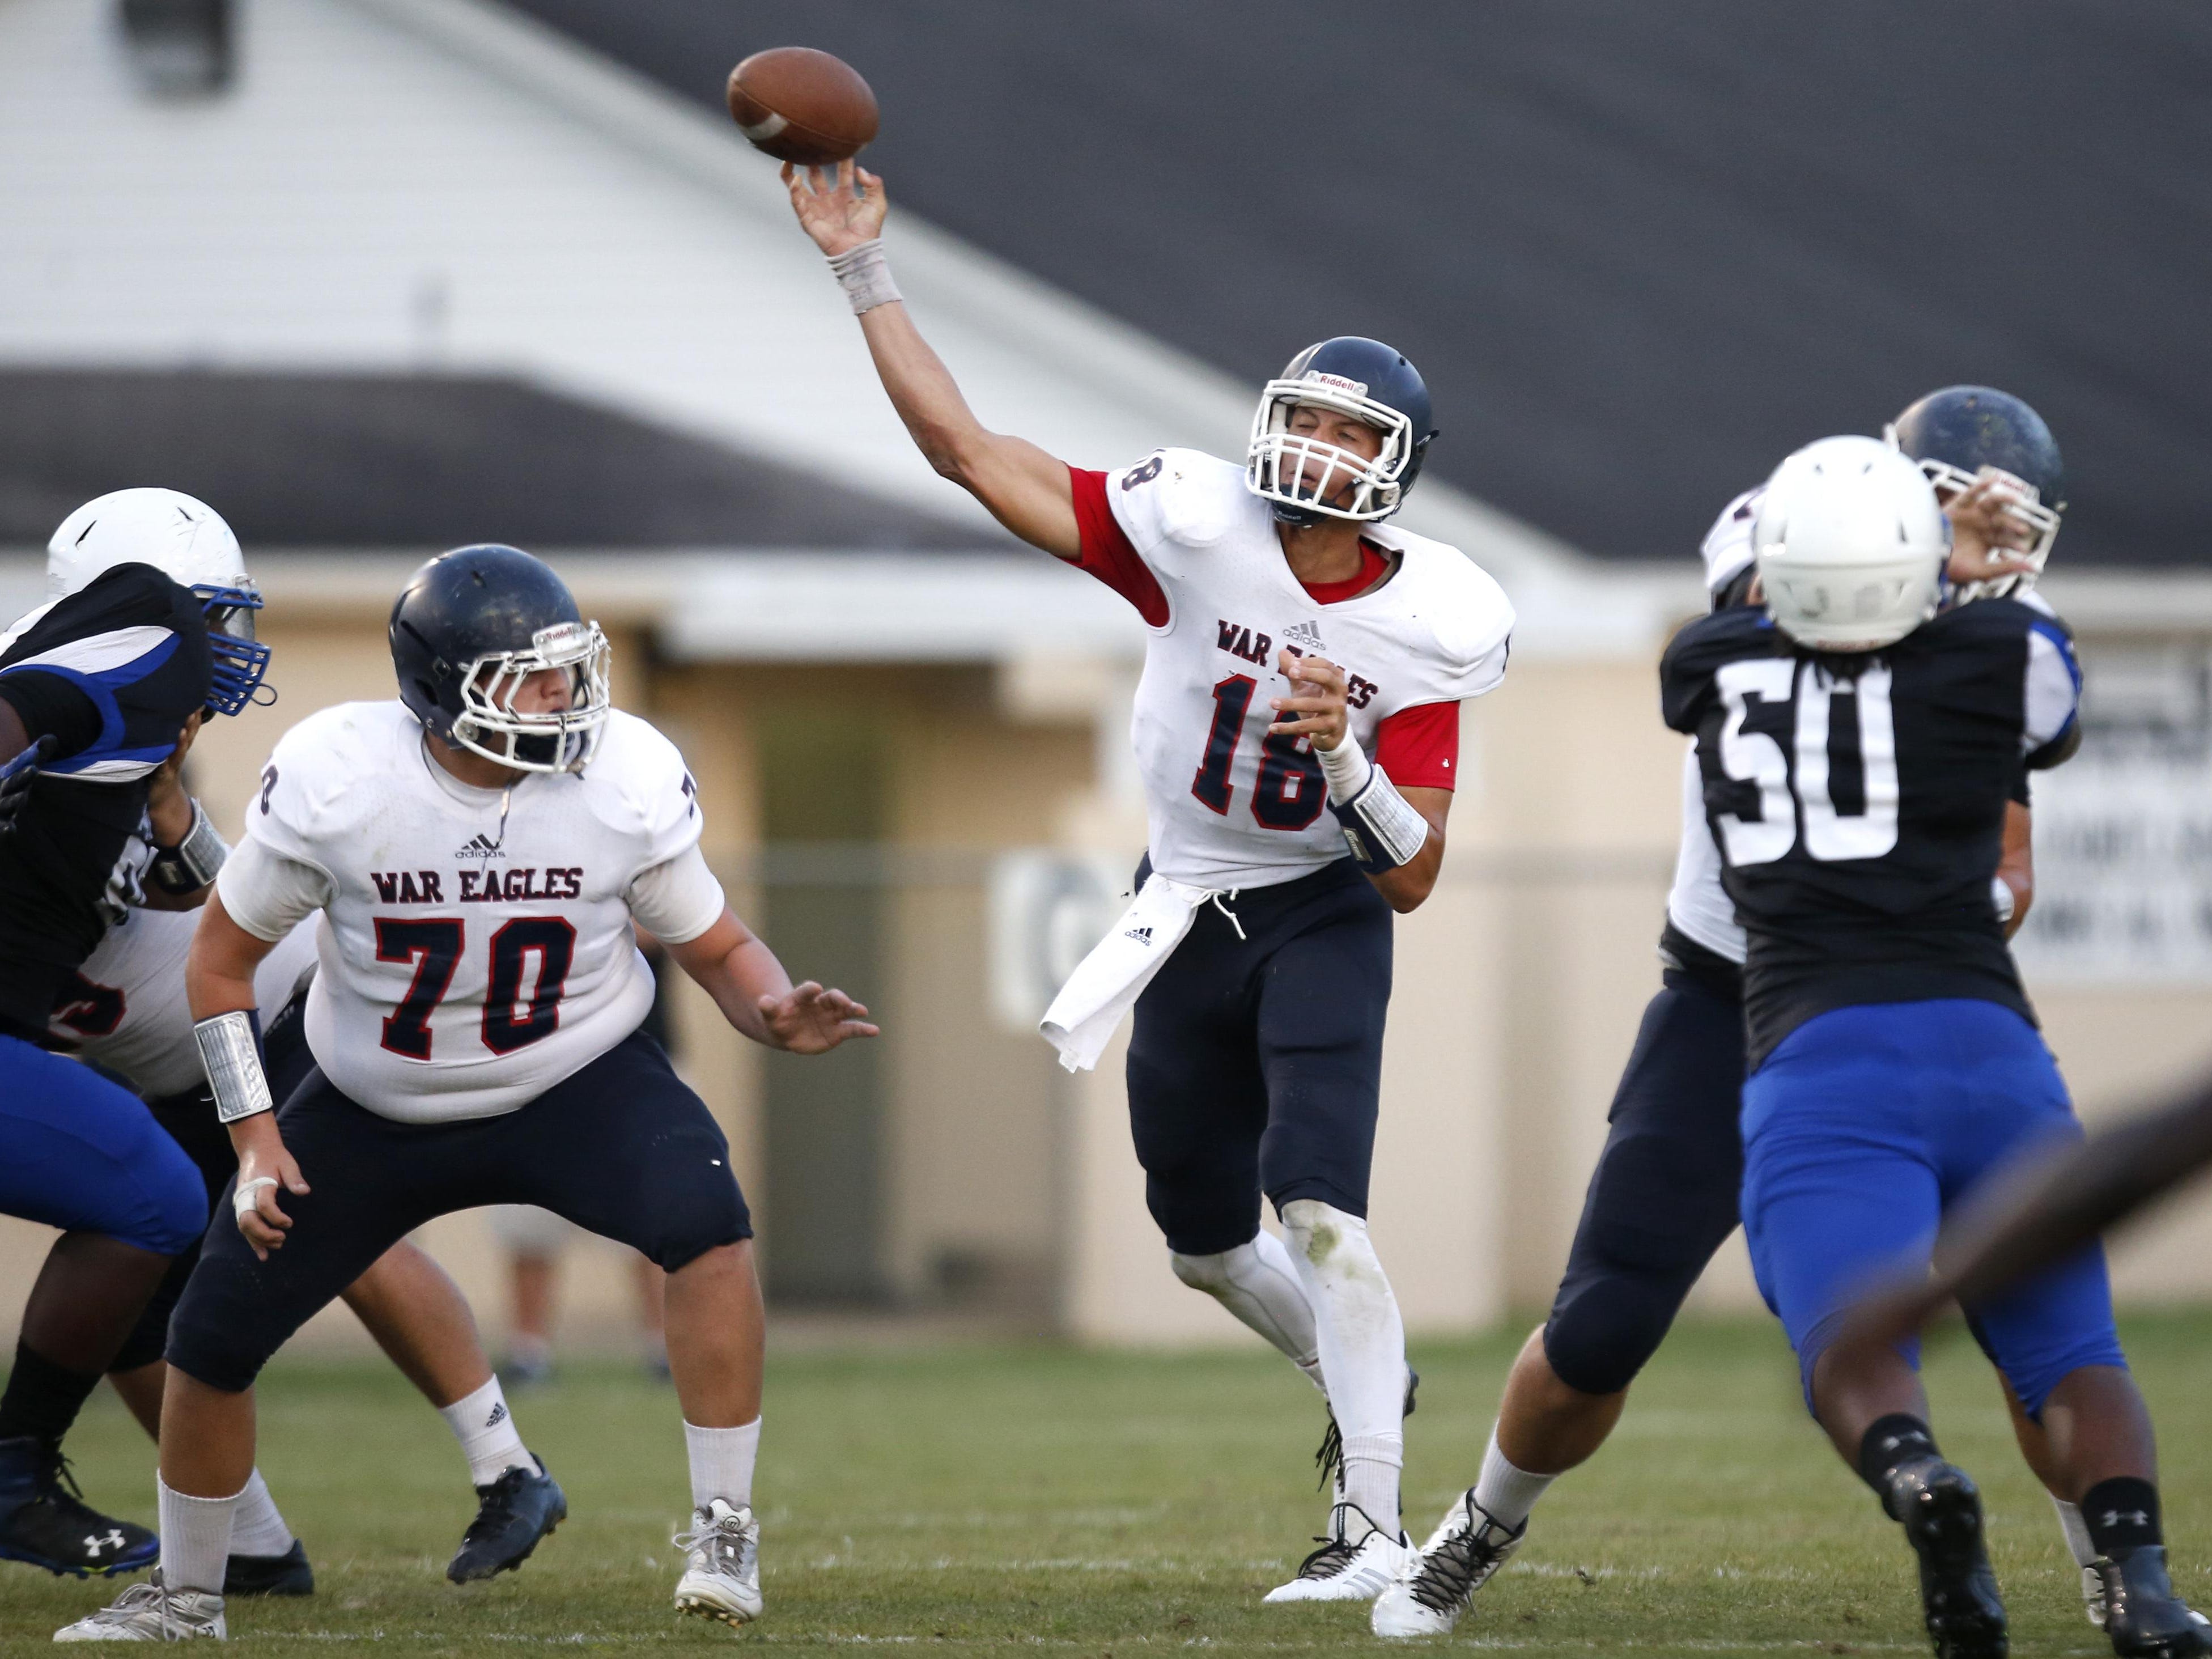 Wakulla senior quarterback Feleipe Franks threw for 289 yards and four touchdowns in a 37-0 win over Madison County last week.